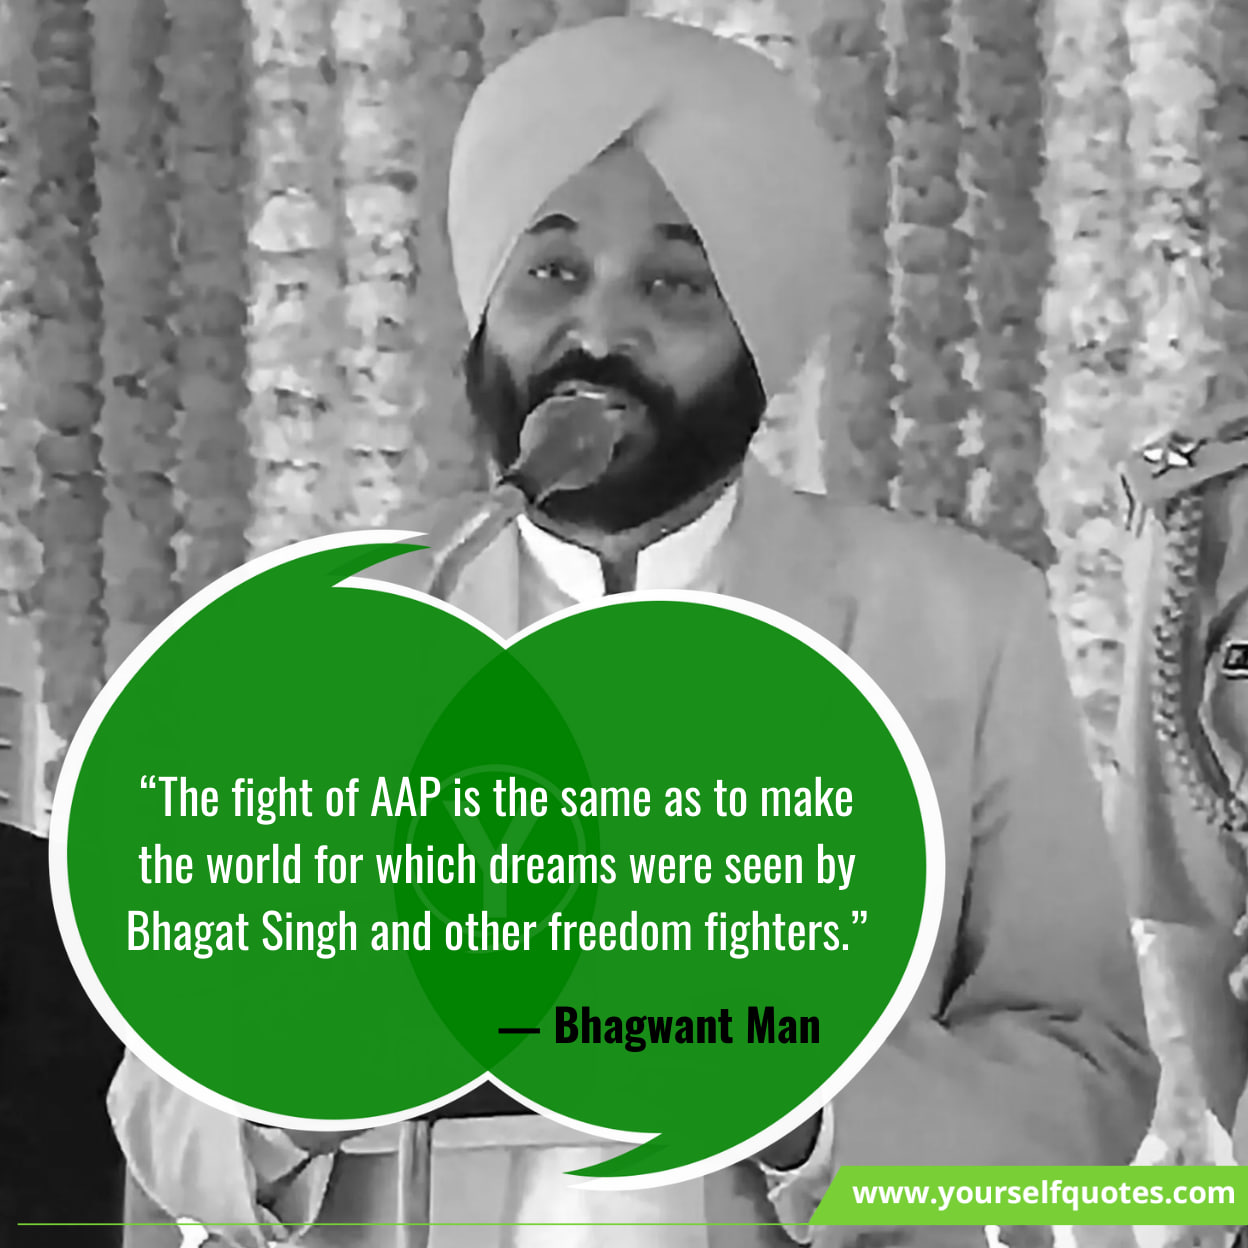 Bhagwant Mann Quotes About AAP